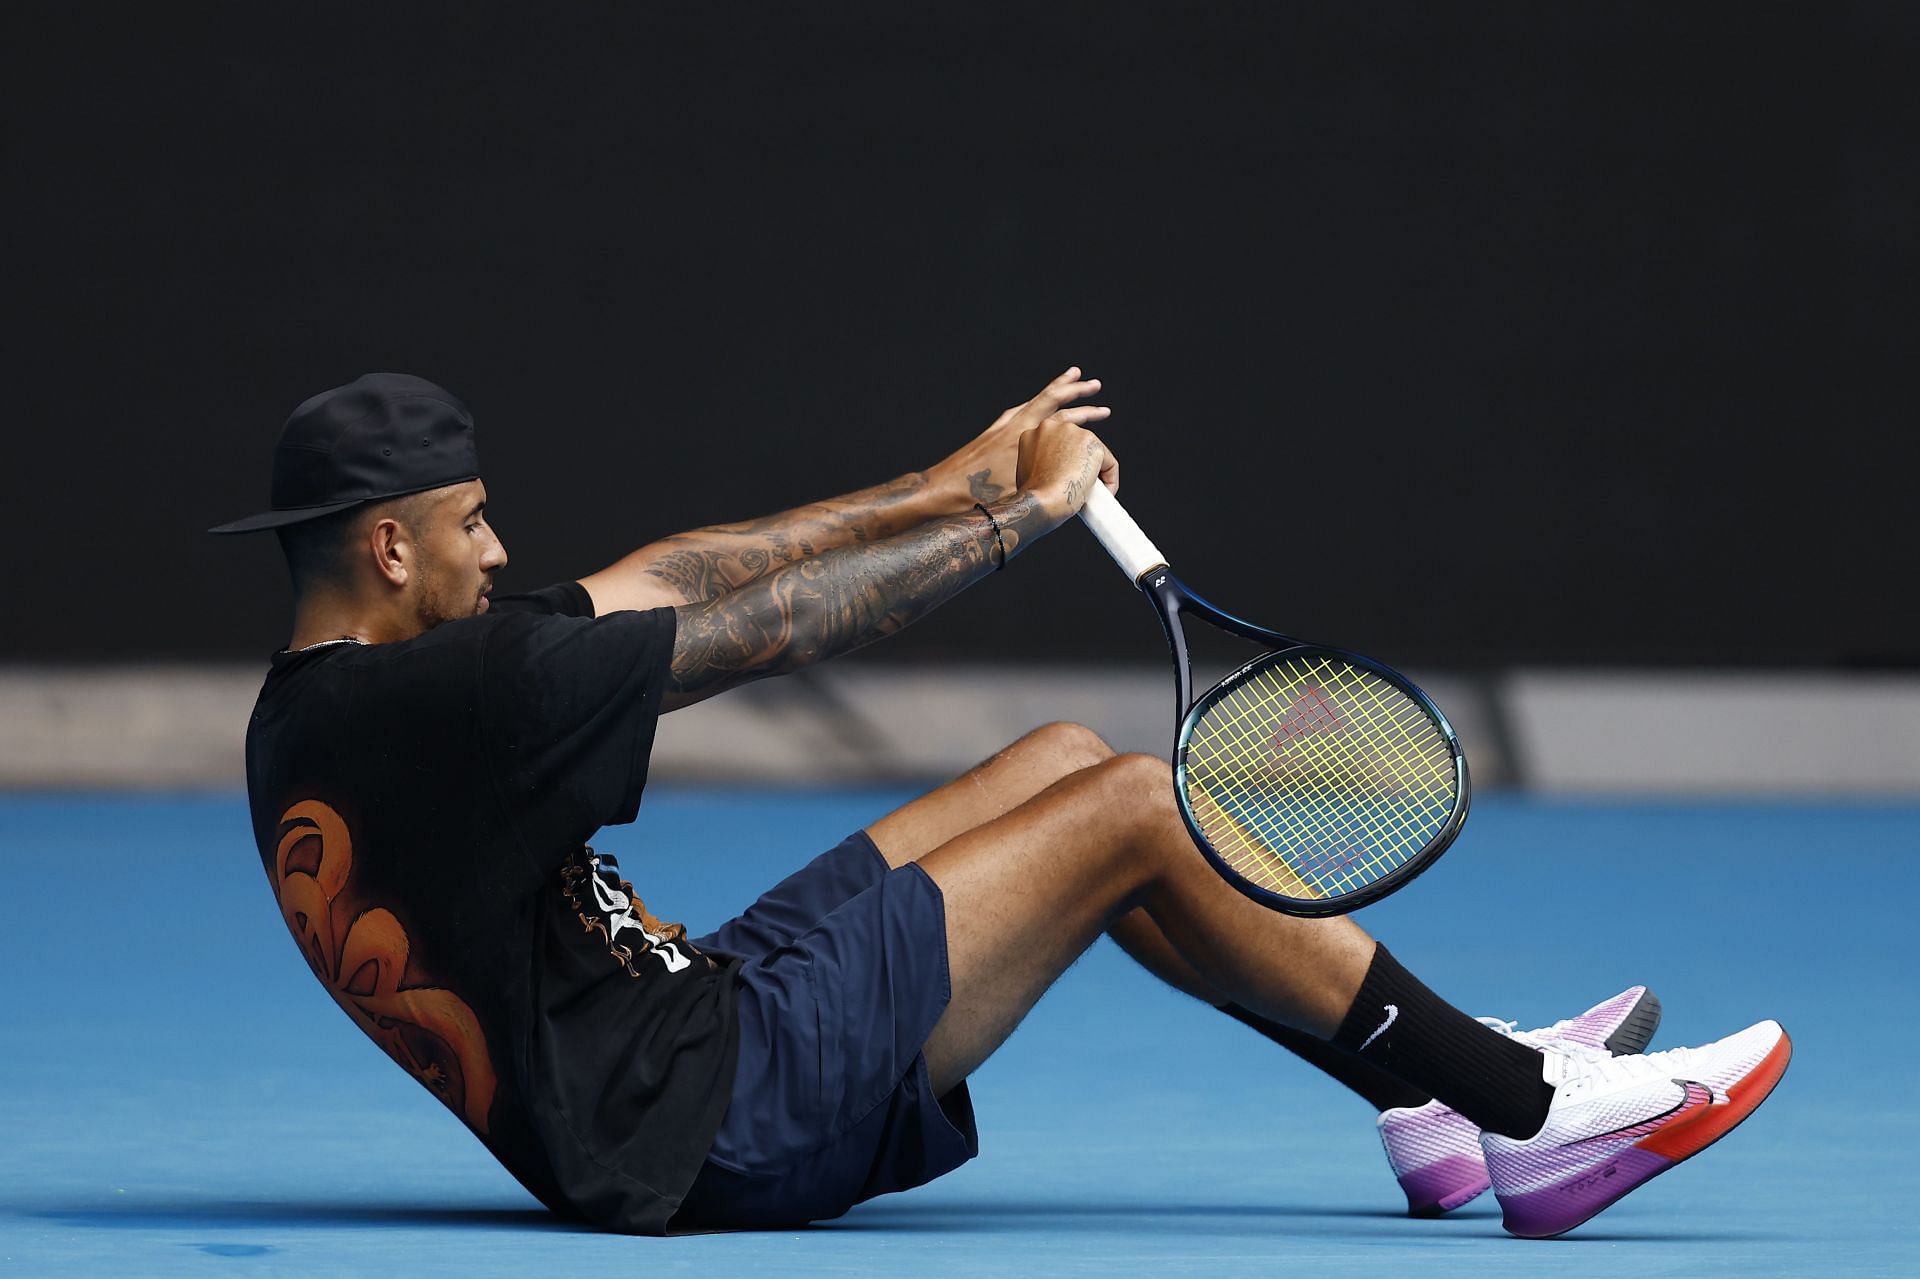 Tennis: Nick Kyrgios becomes joint owner of NBL basketball team - NZ Herald